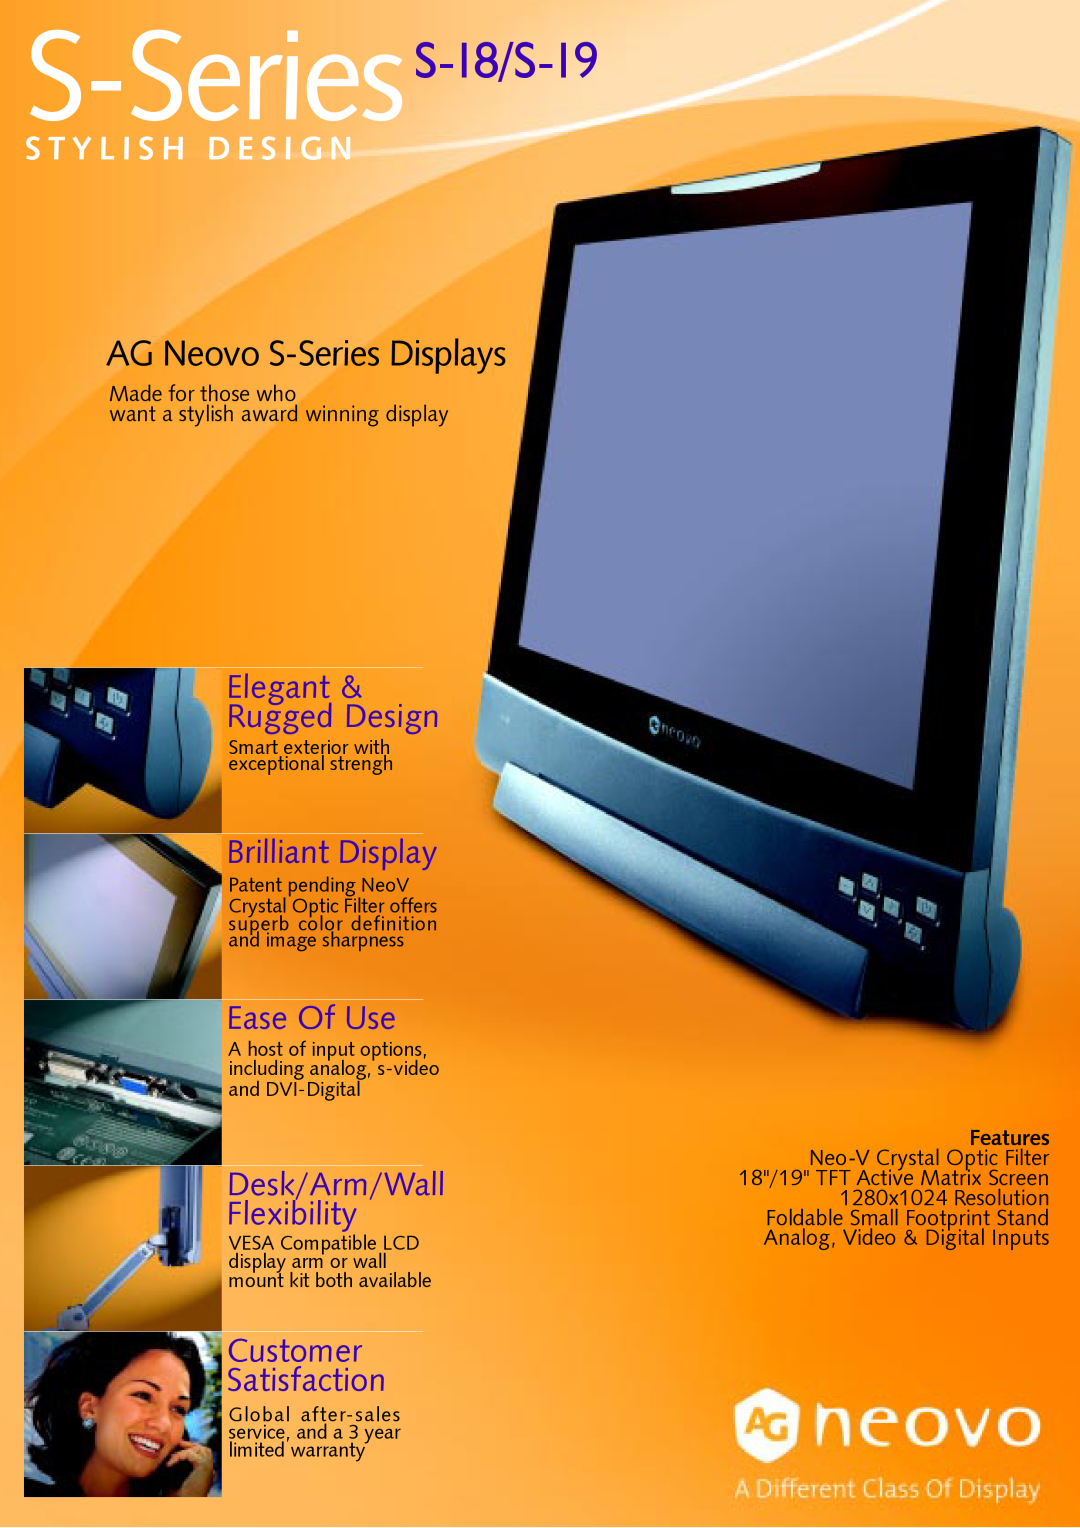 AG Neovo S-18/S-19 warranty Made for those who want a stylish award winning display, Analog, Video & Digital Inputs 